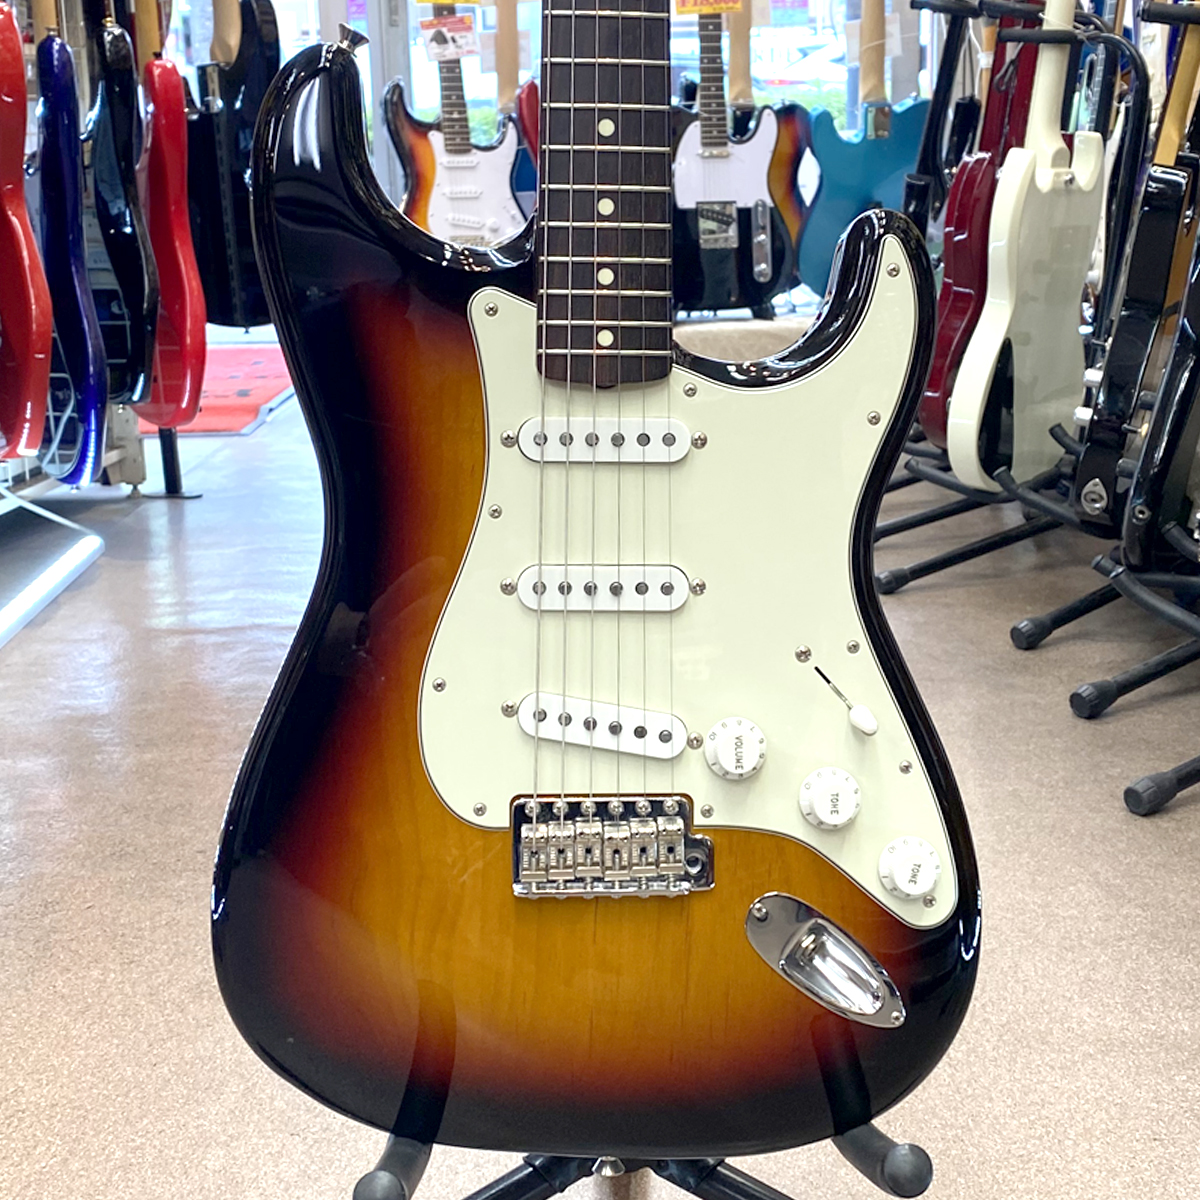 TraditionalⅡ 60s Stratocaster 2021年製